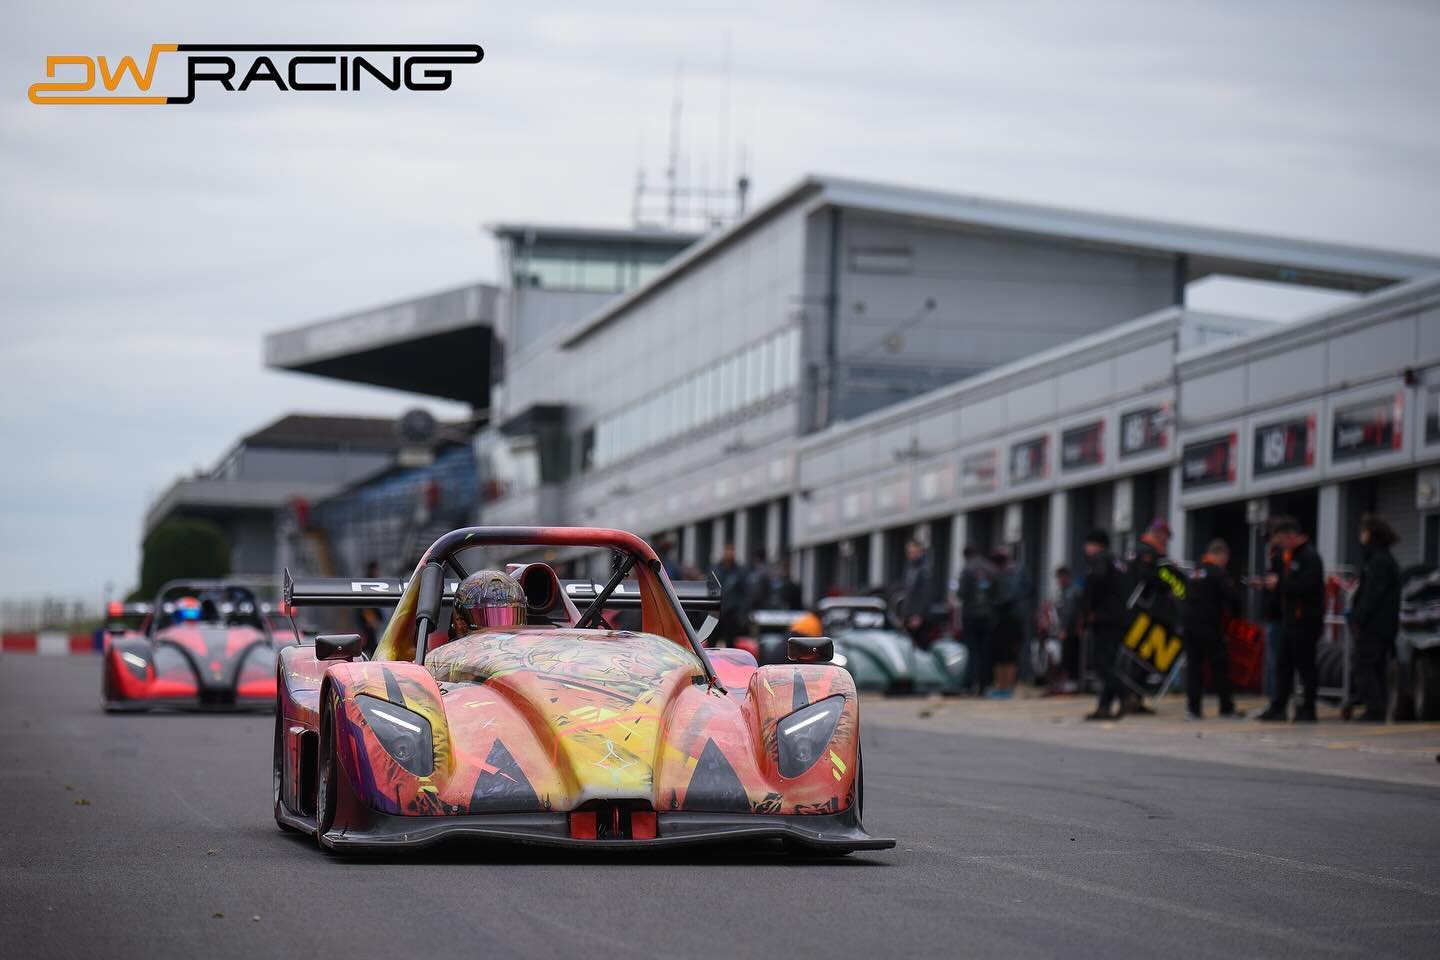 Hagerty Radical Cup Round 1 🇬🇧
-
Tough weekend, trying to make the most of the races after being caught in many incidents throughout !
-
Quali: P3
-
Race 1: P7 - While running in forth after battling throughout the whole race a car that was a lap d